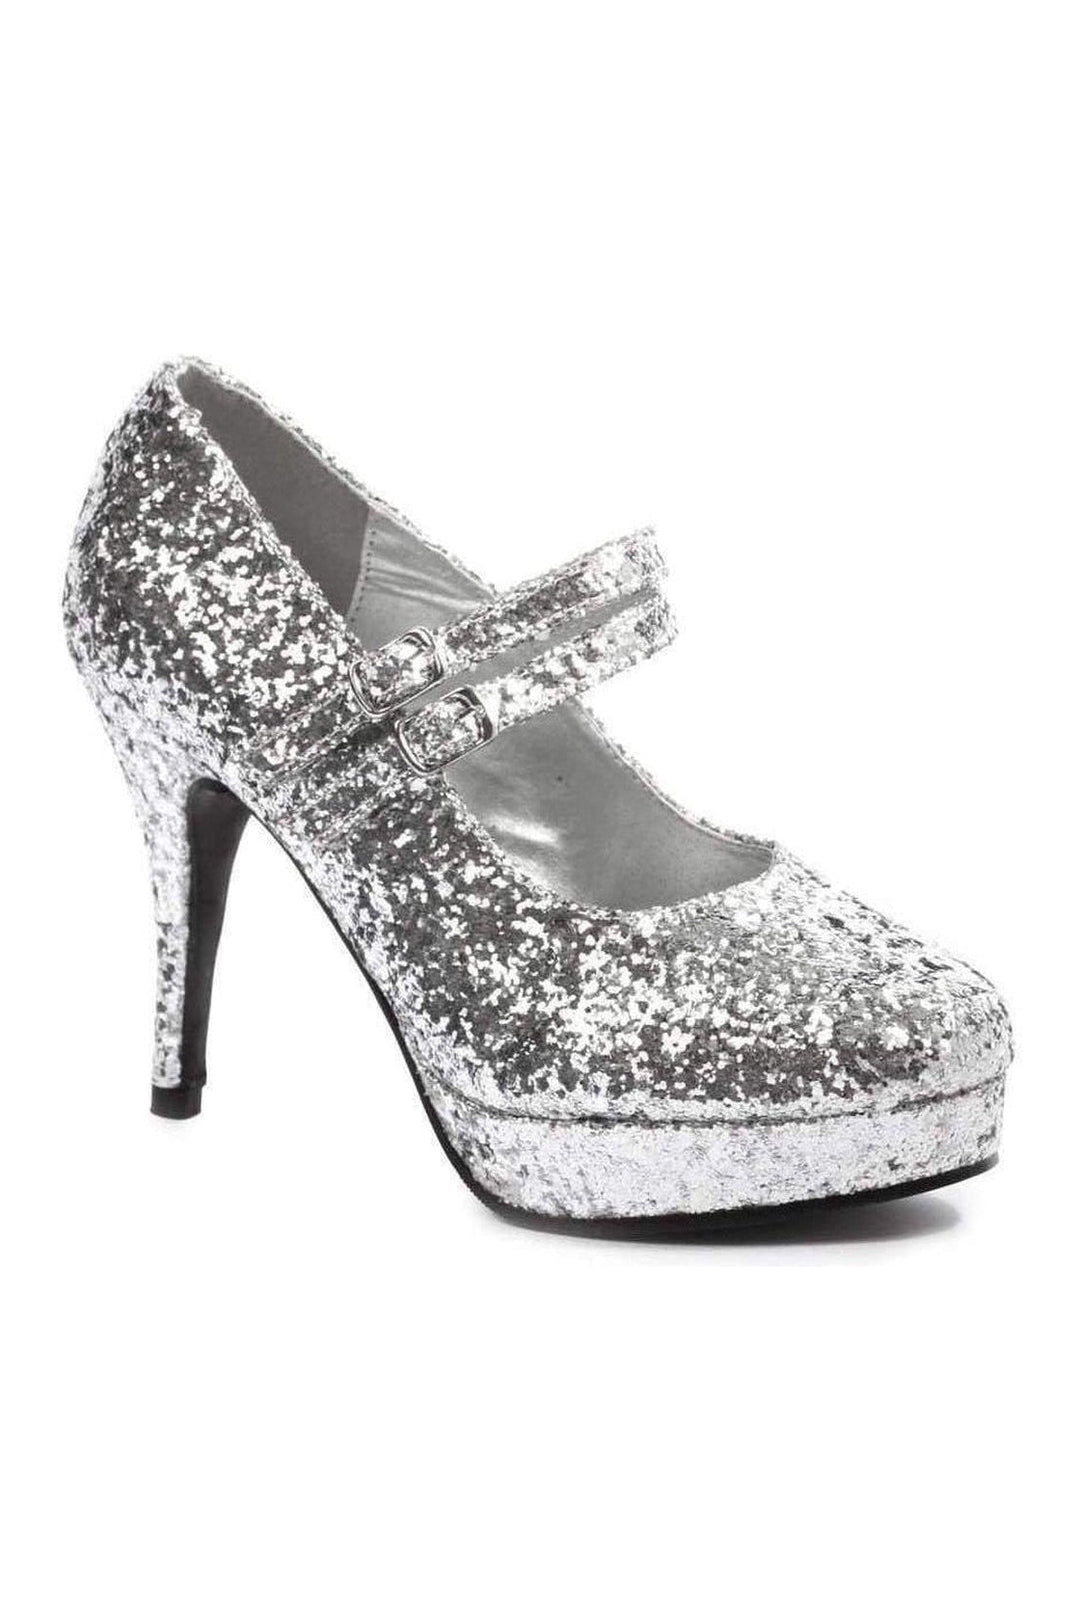 421-JANE-G Mary Jane | Silver Glitter-Ellie Shoes-Silver-Mary Janes-SEXYSHOES.COM